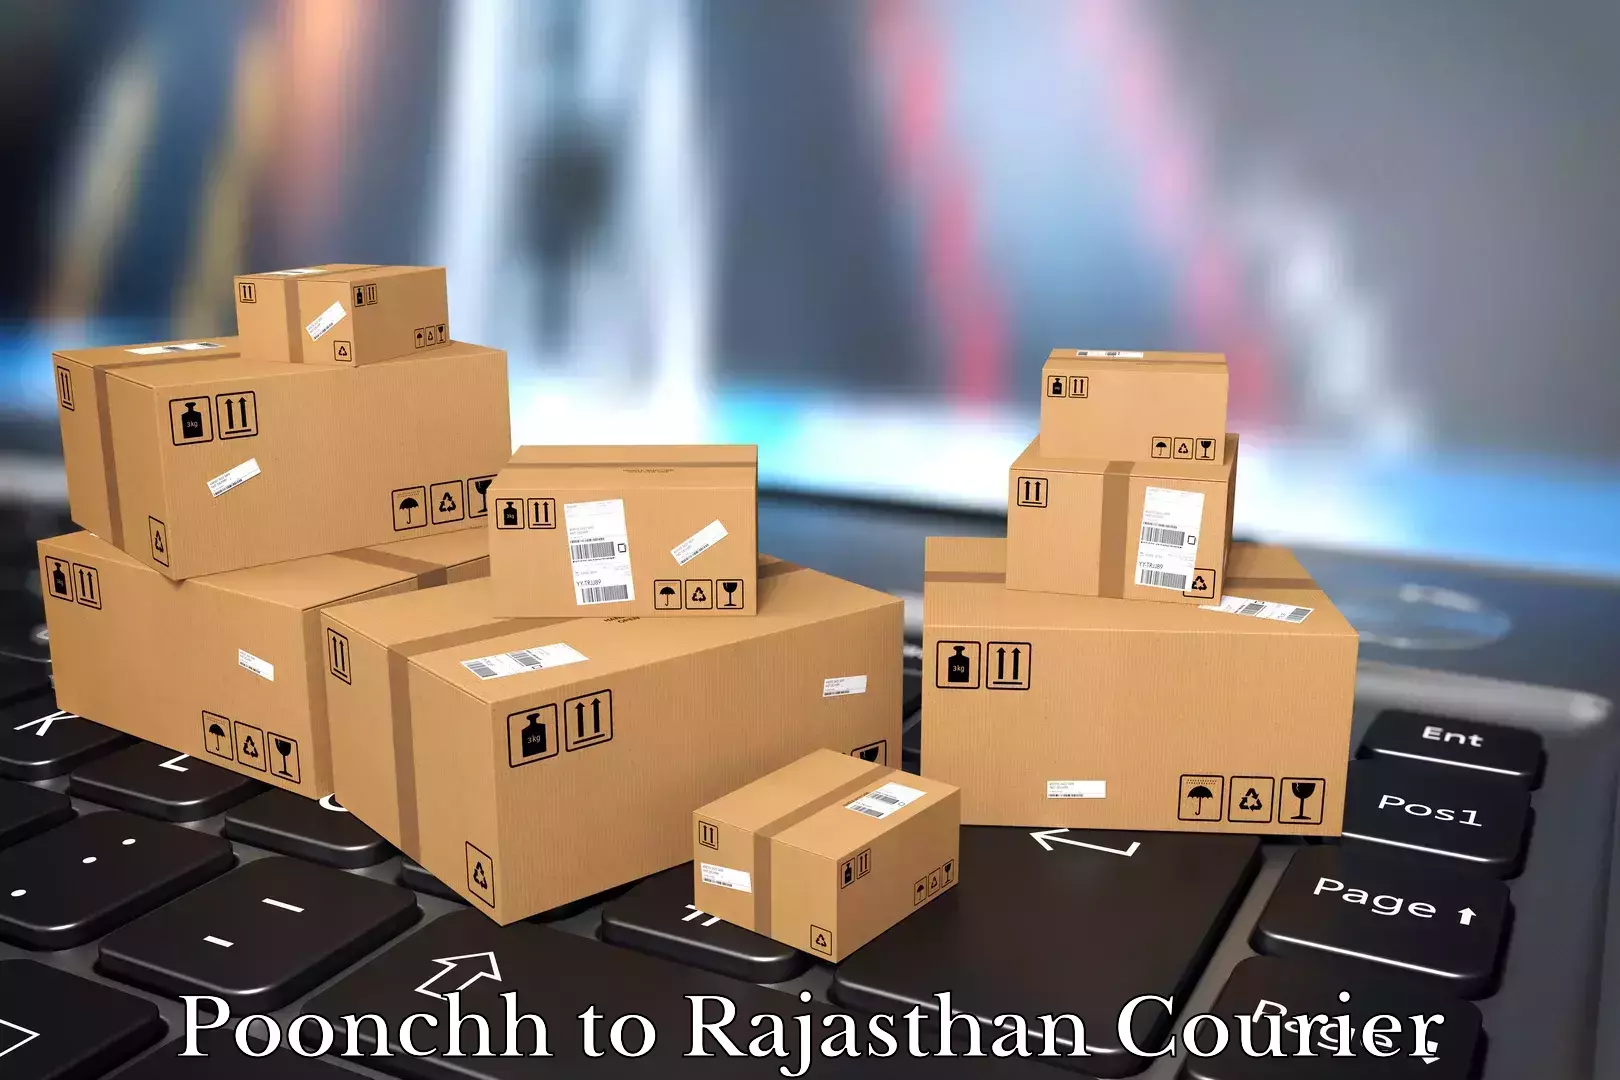 Furniture transport professionals Poonchh to Rajasthan